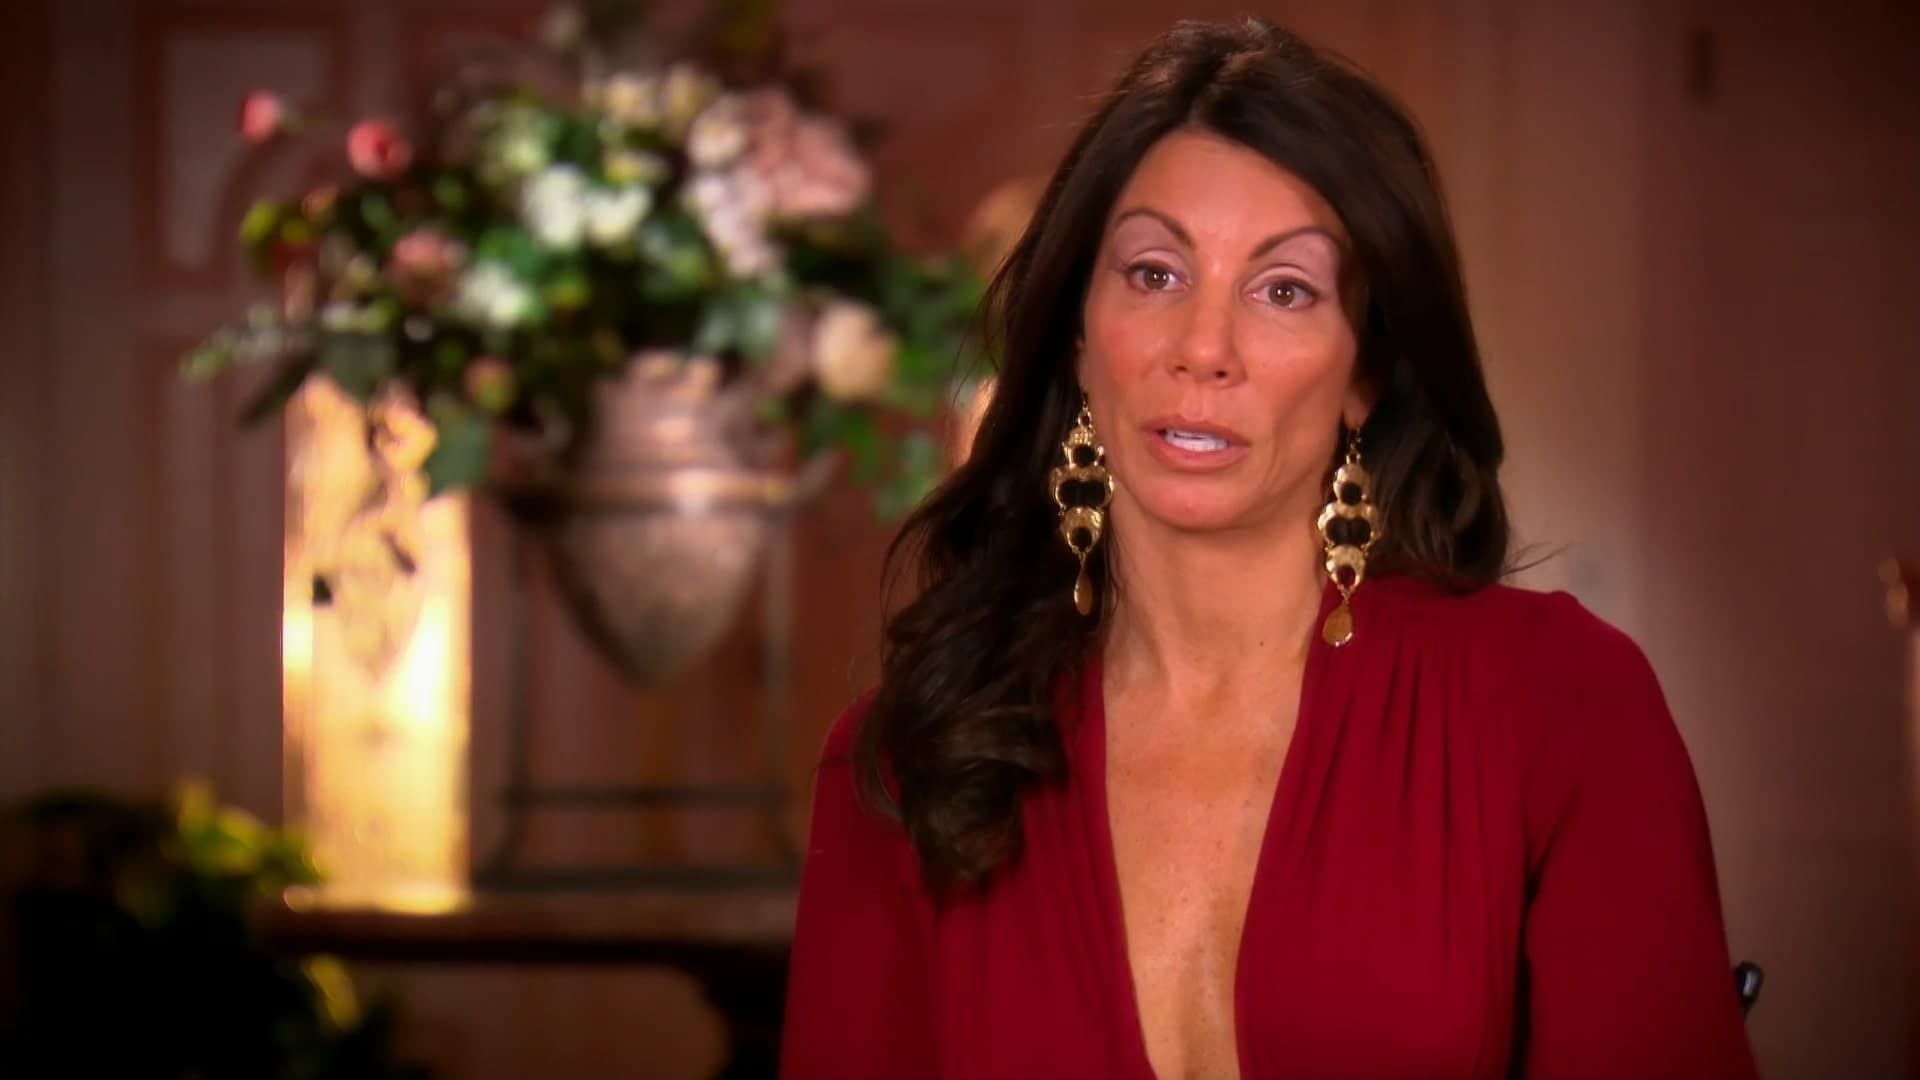 The Real Housewives of New Jersey background